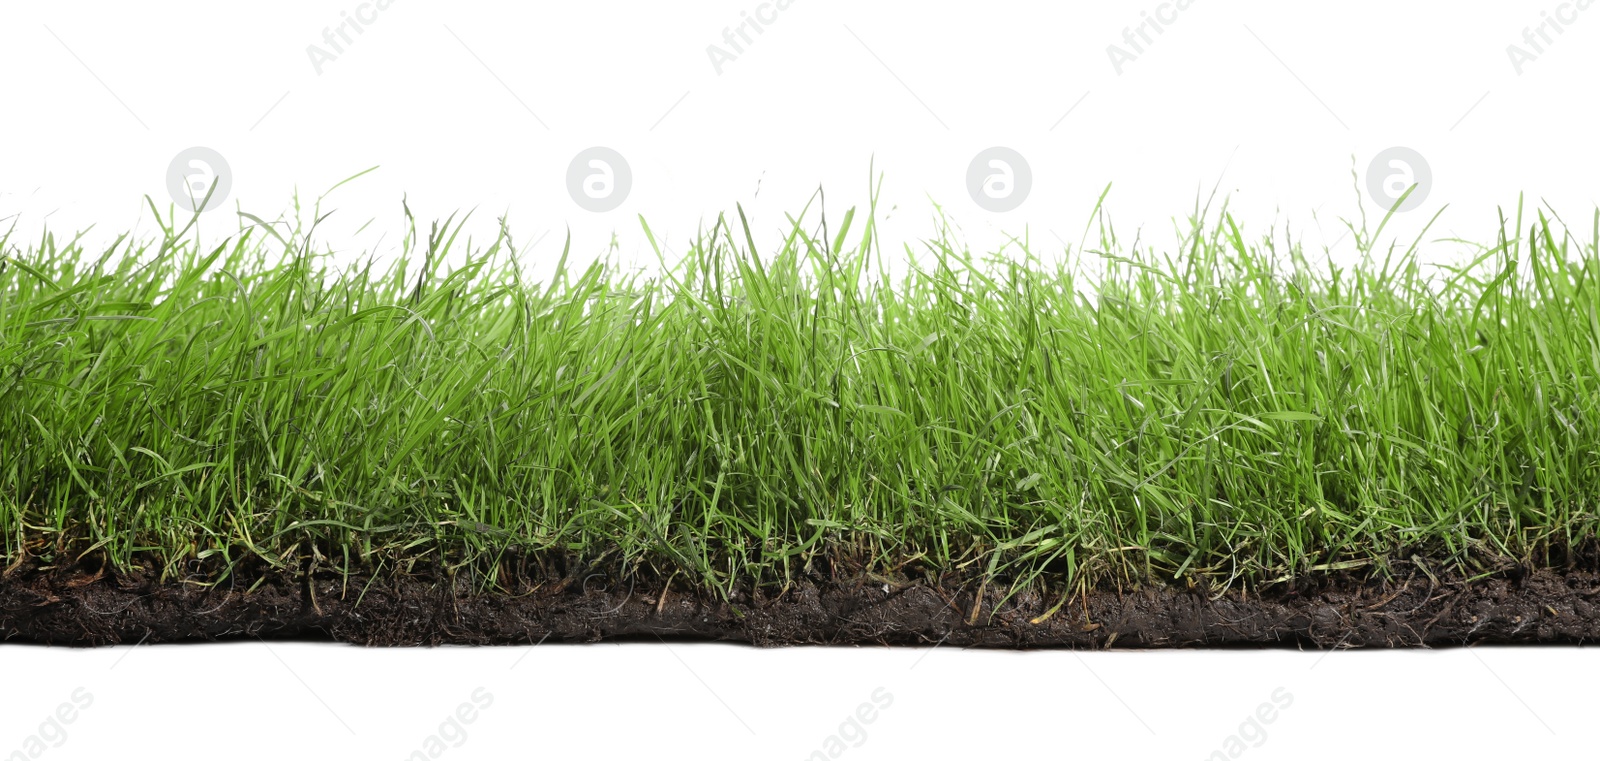 Photo of Soil with lush green grass on white background